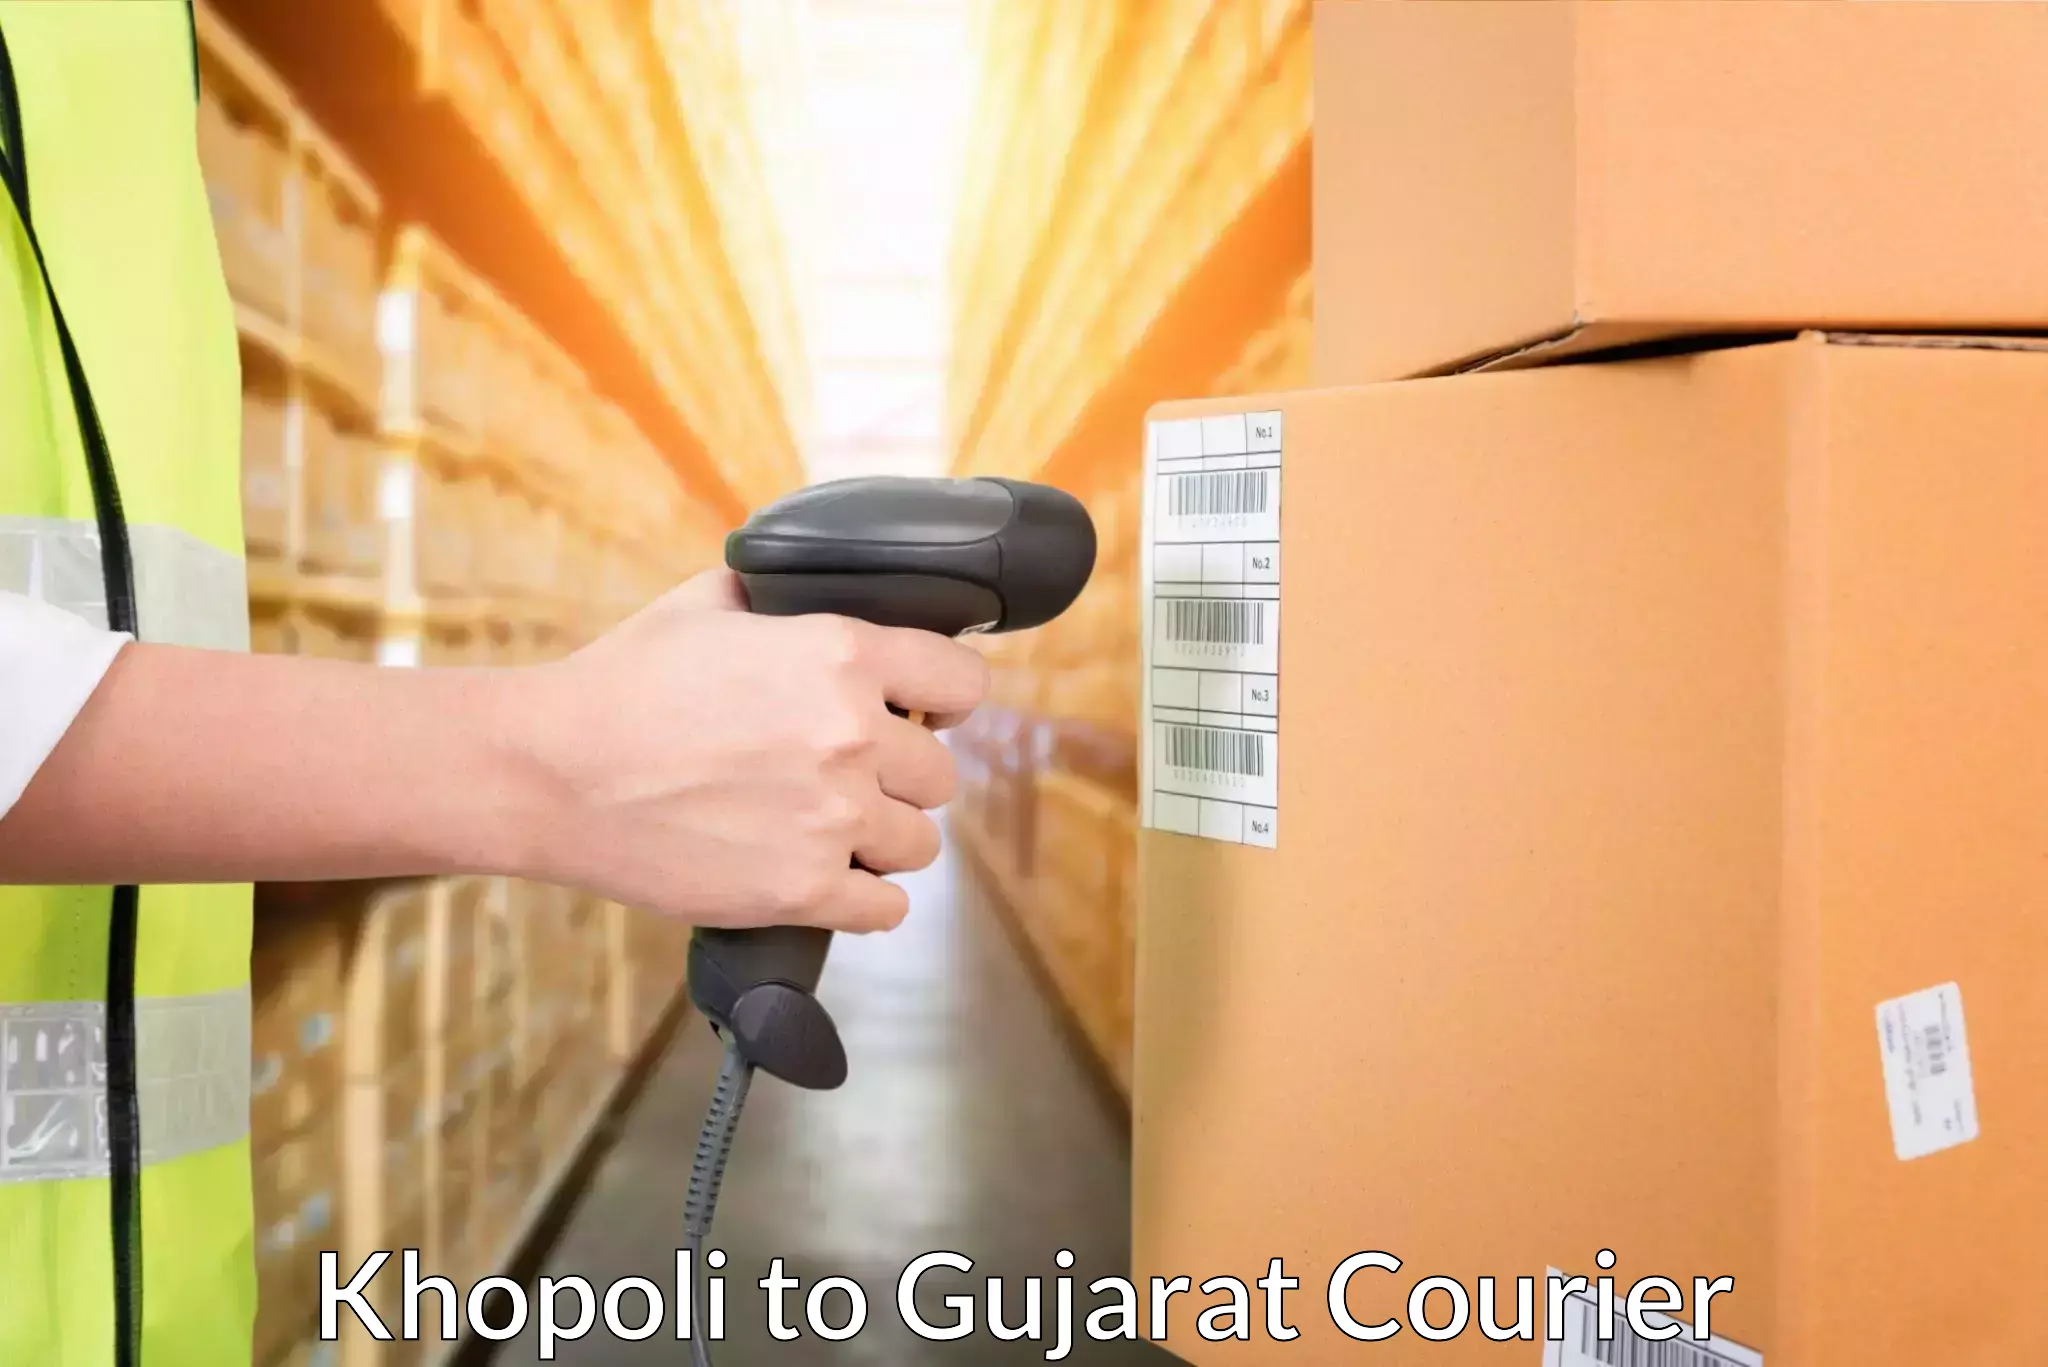 State-of-the-art courier technology Khopoli to Surat